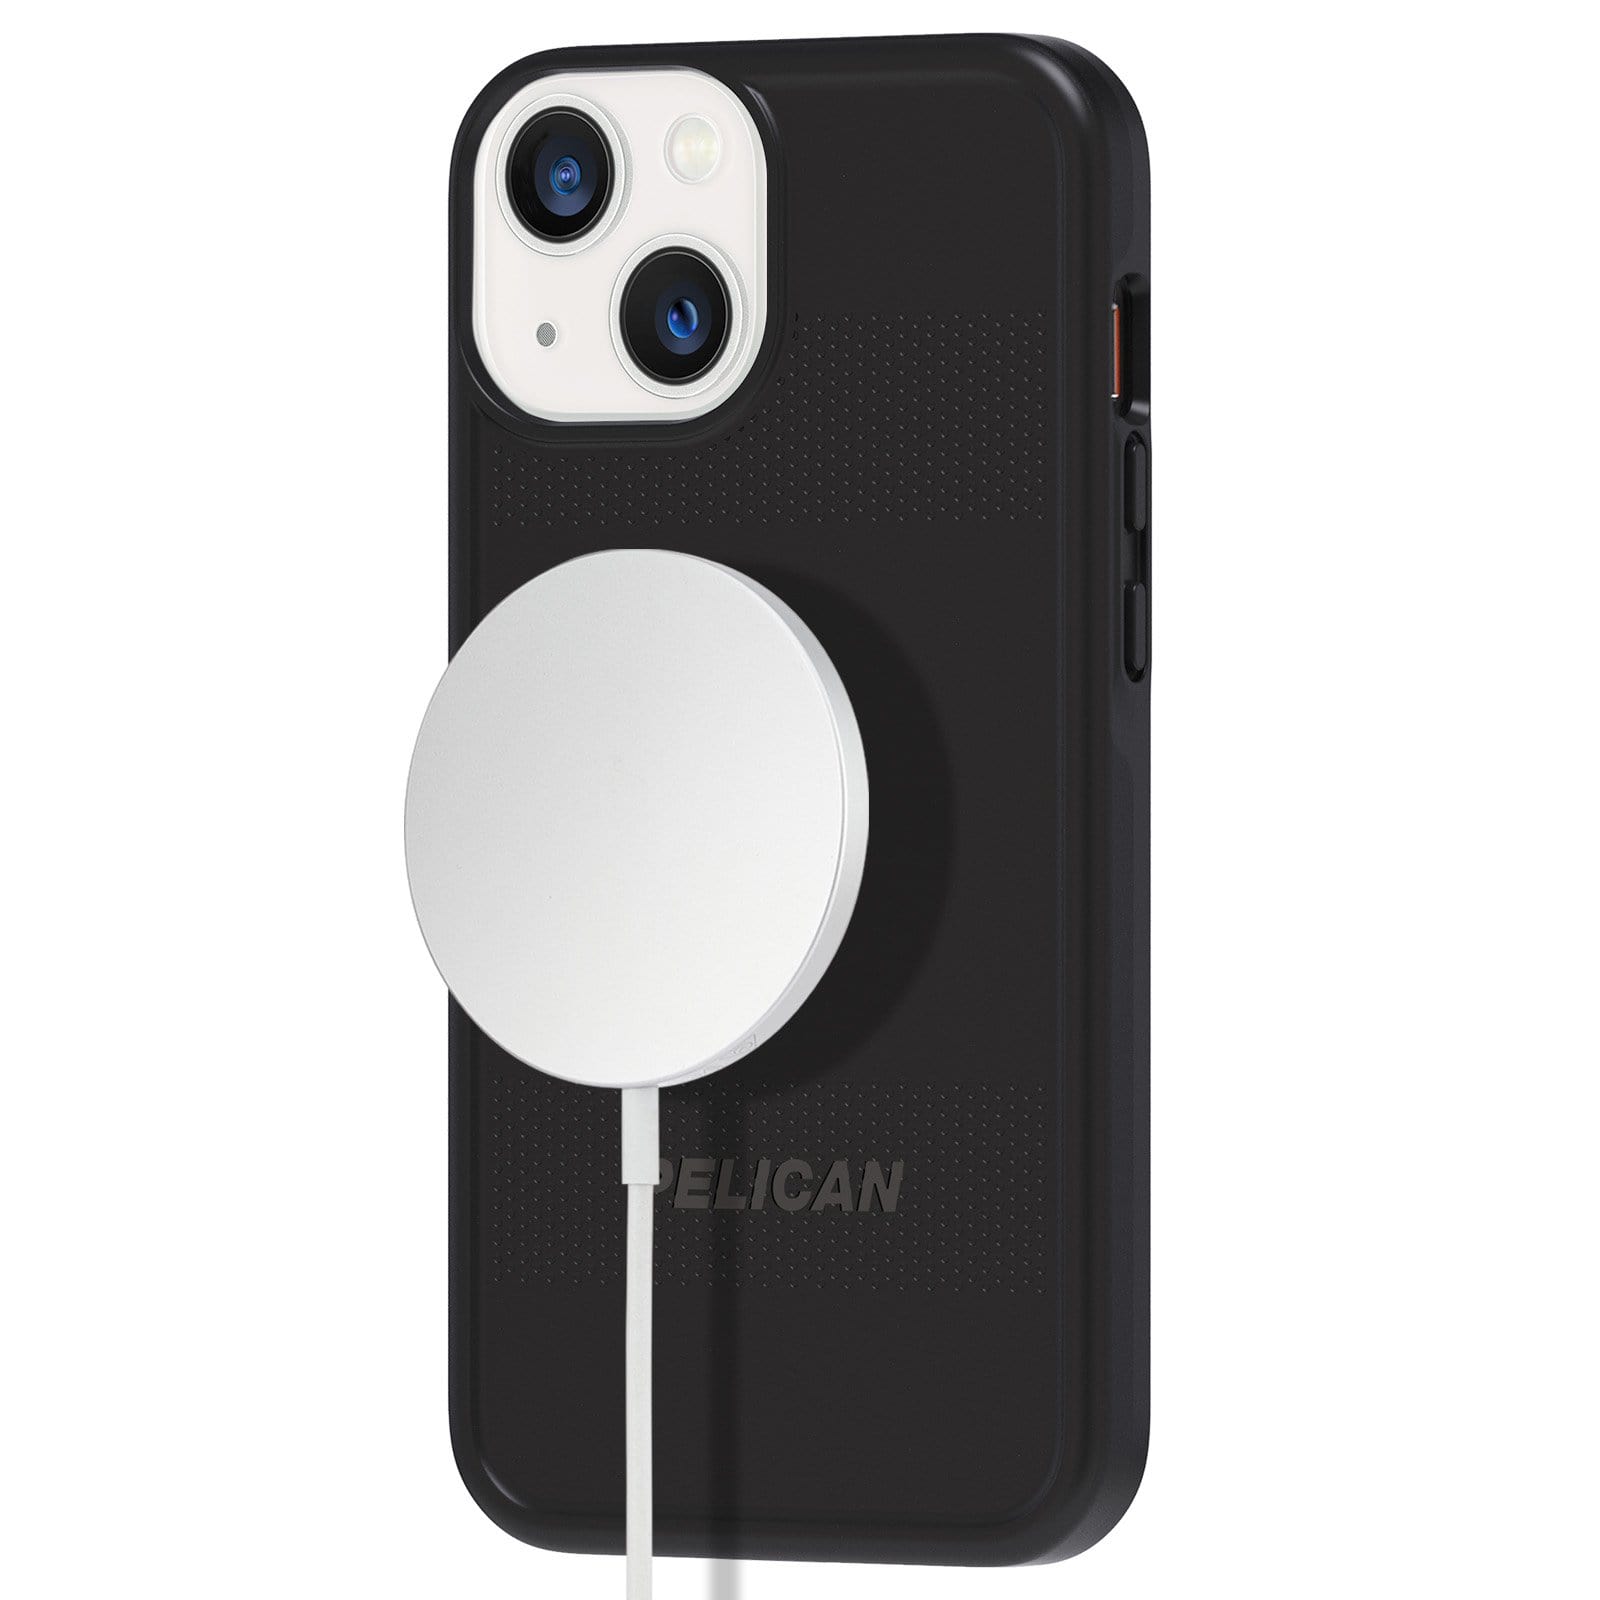 Pelican Protector (Works with MagSafe) Case for iPhone 13 Devices - Black